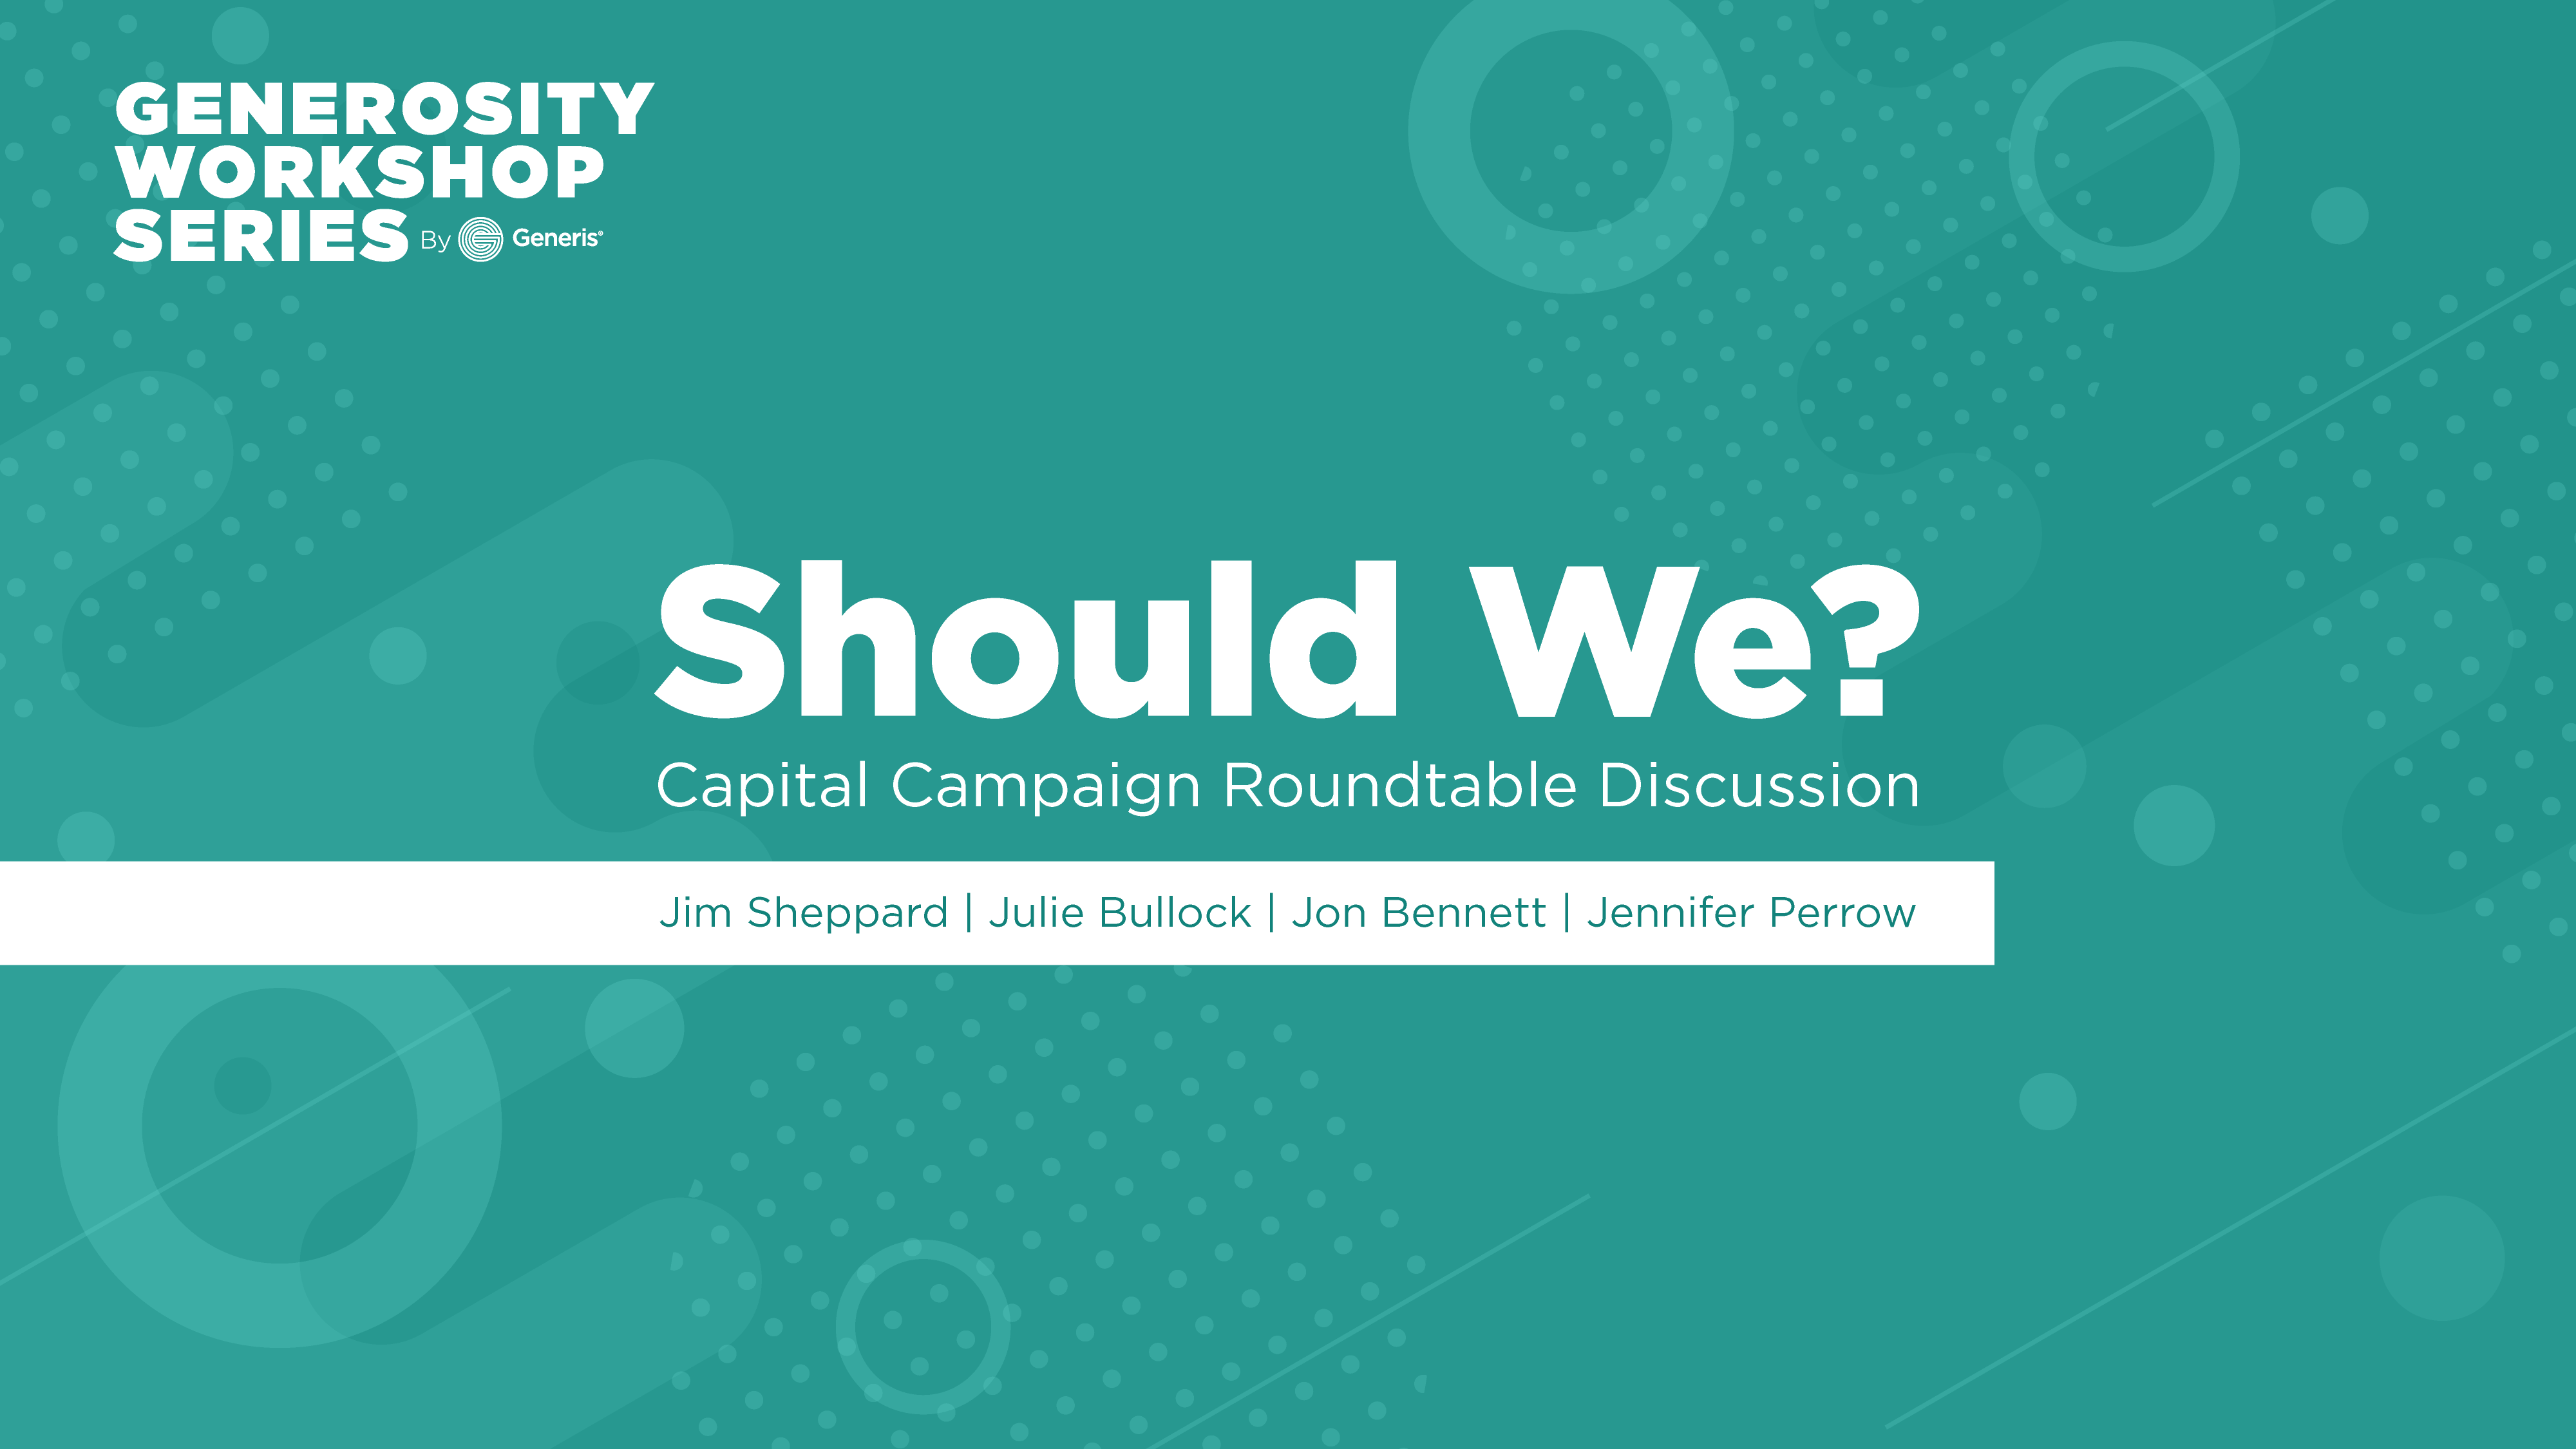 A Capital Campaign Round Table Discussion